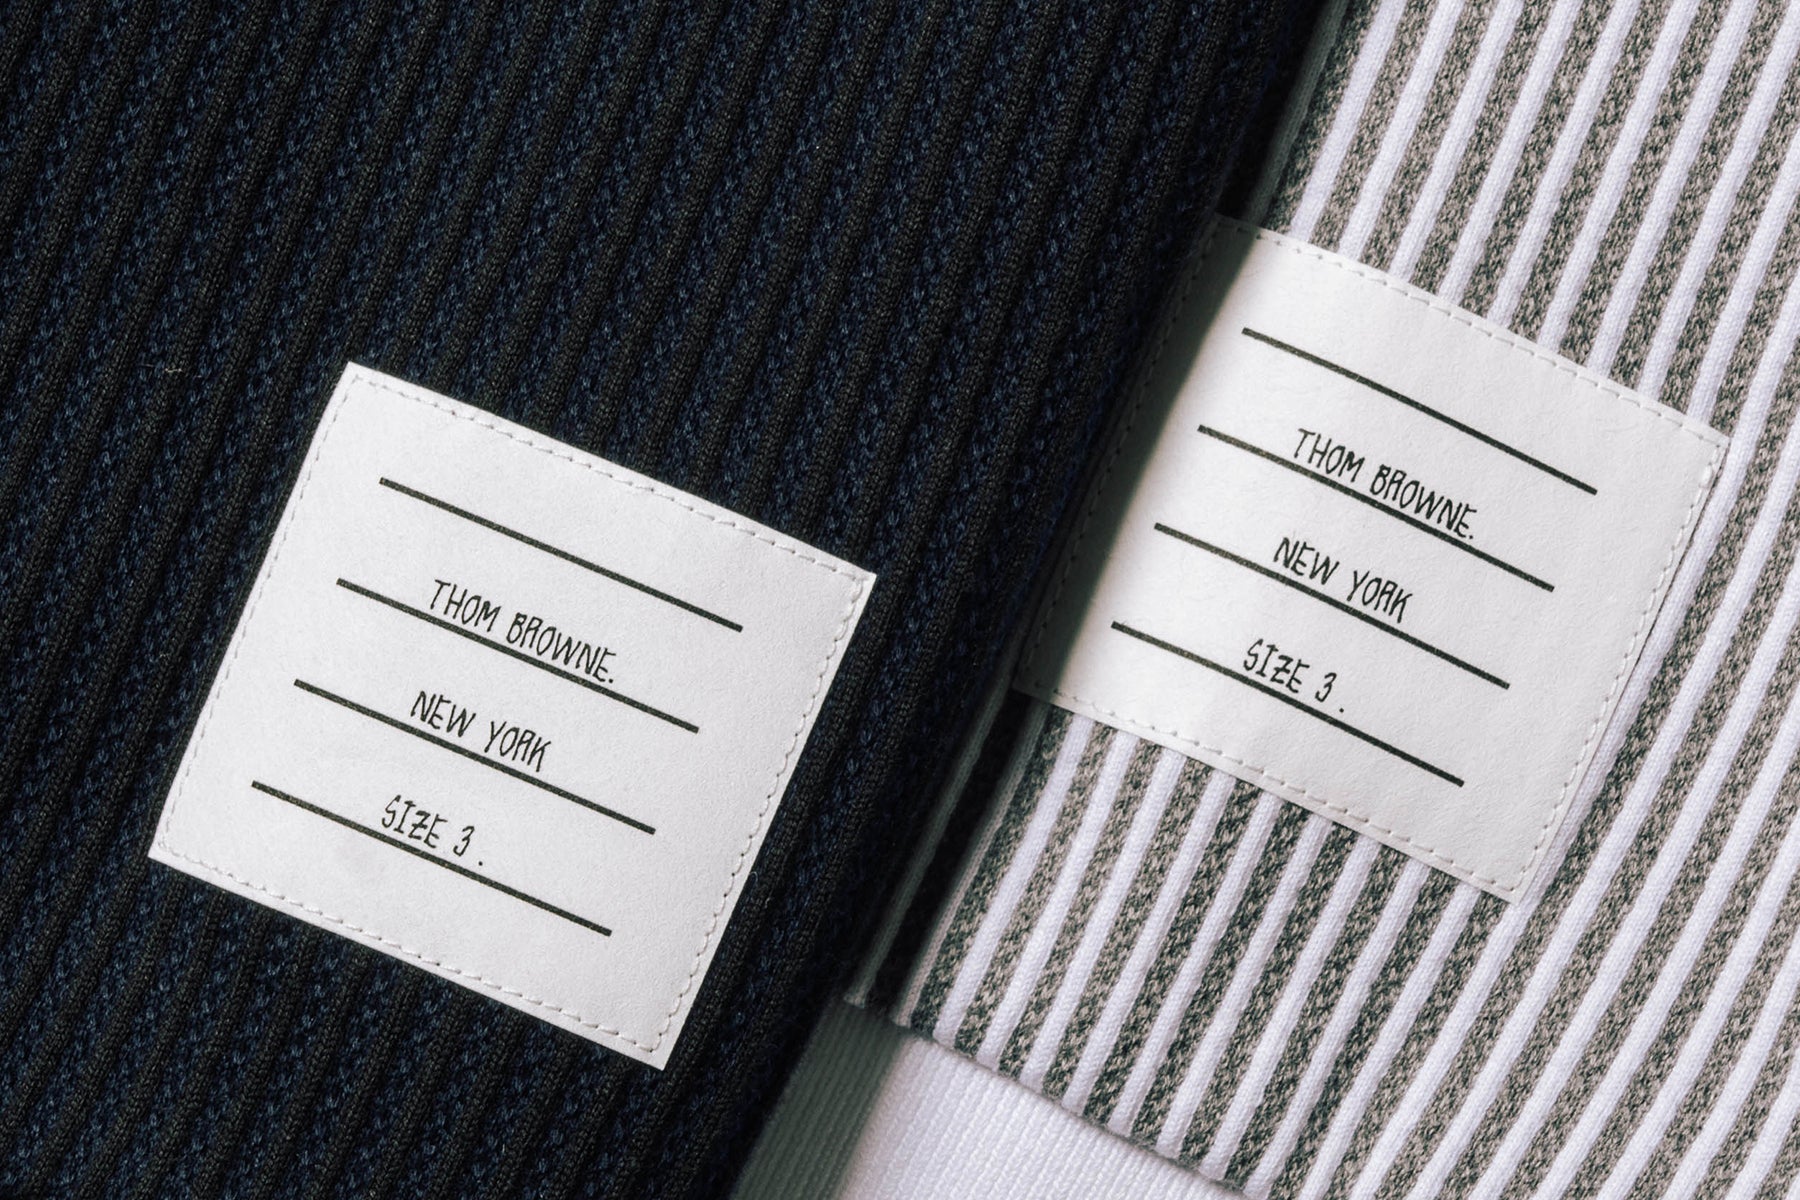 Thom Browne Clothing - Shirts, Shoes, & Accessories | Feature